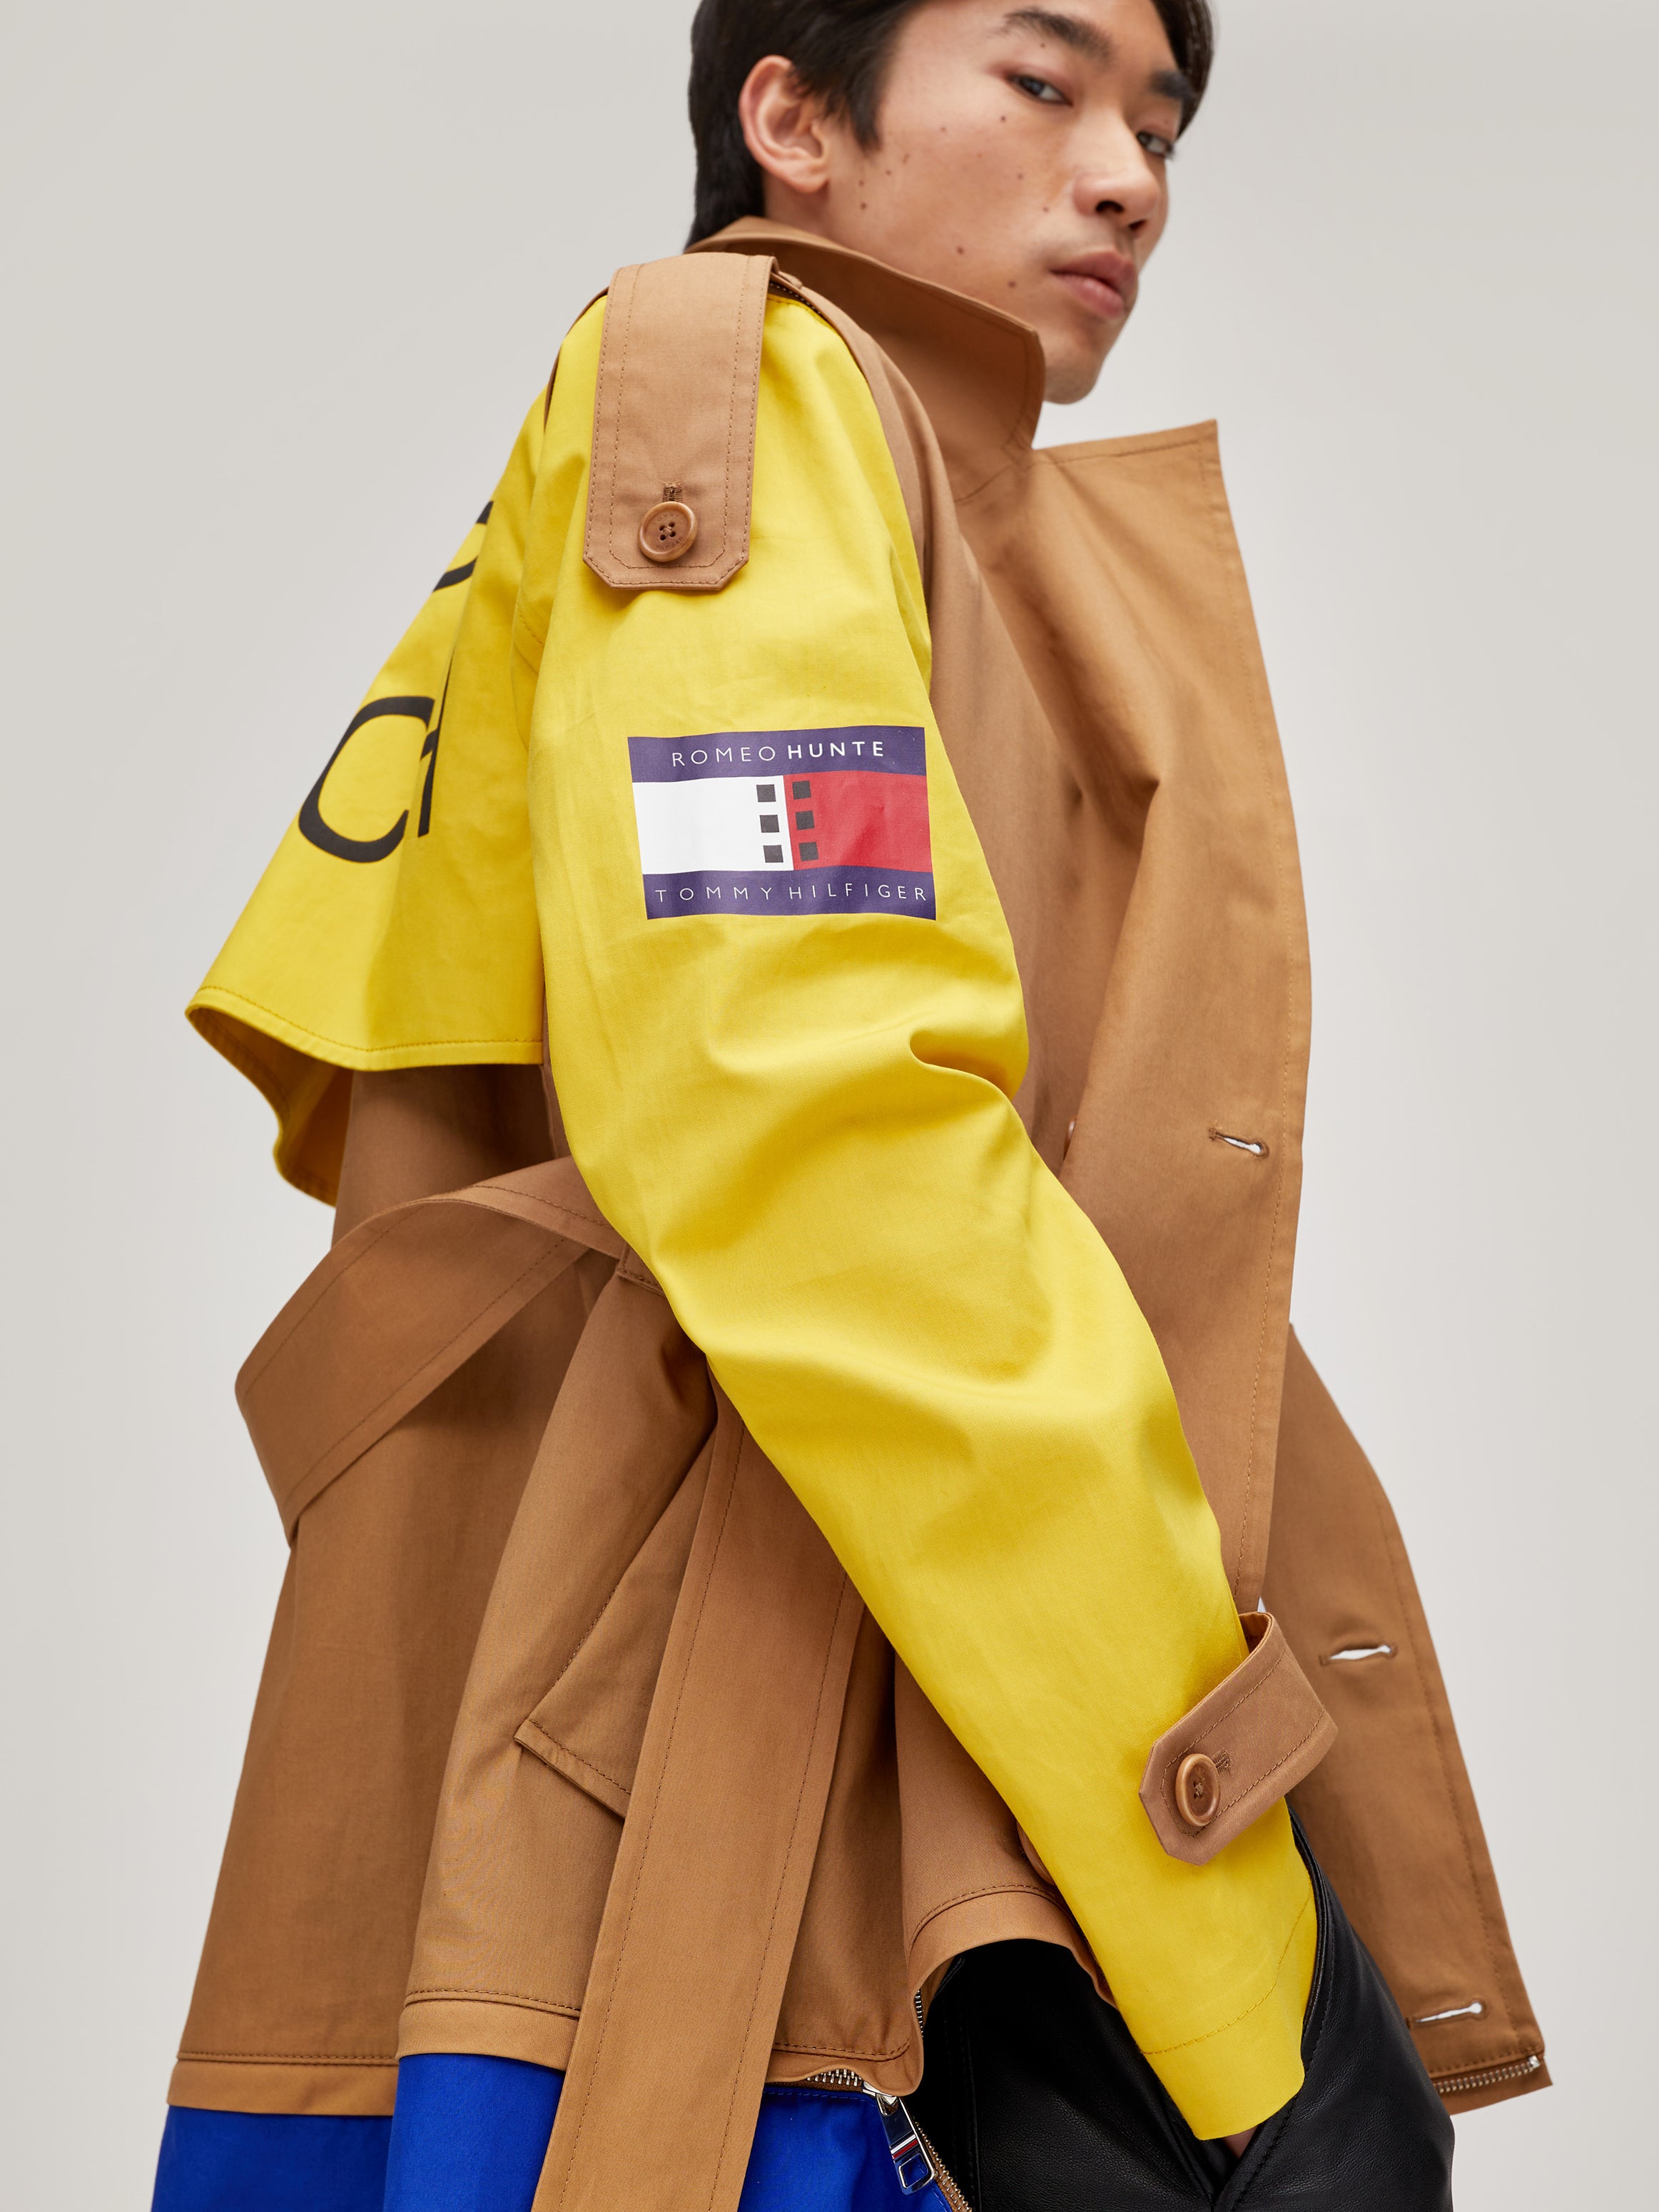 TOMMYXROMEO DUAL GENDER “IT'S JUST TRENCH” JACKET – Romeo Hunte